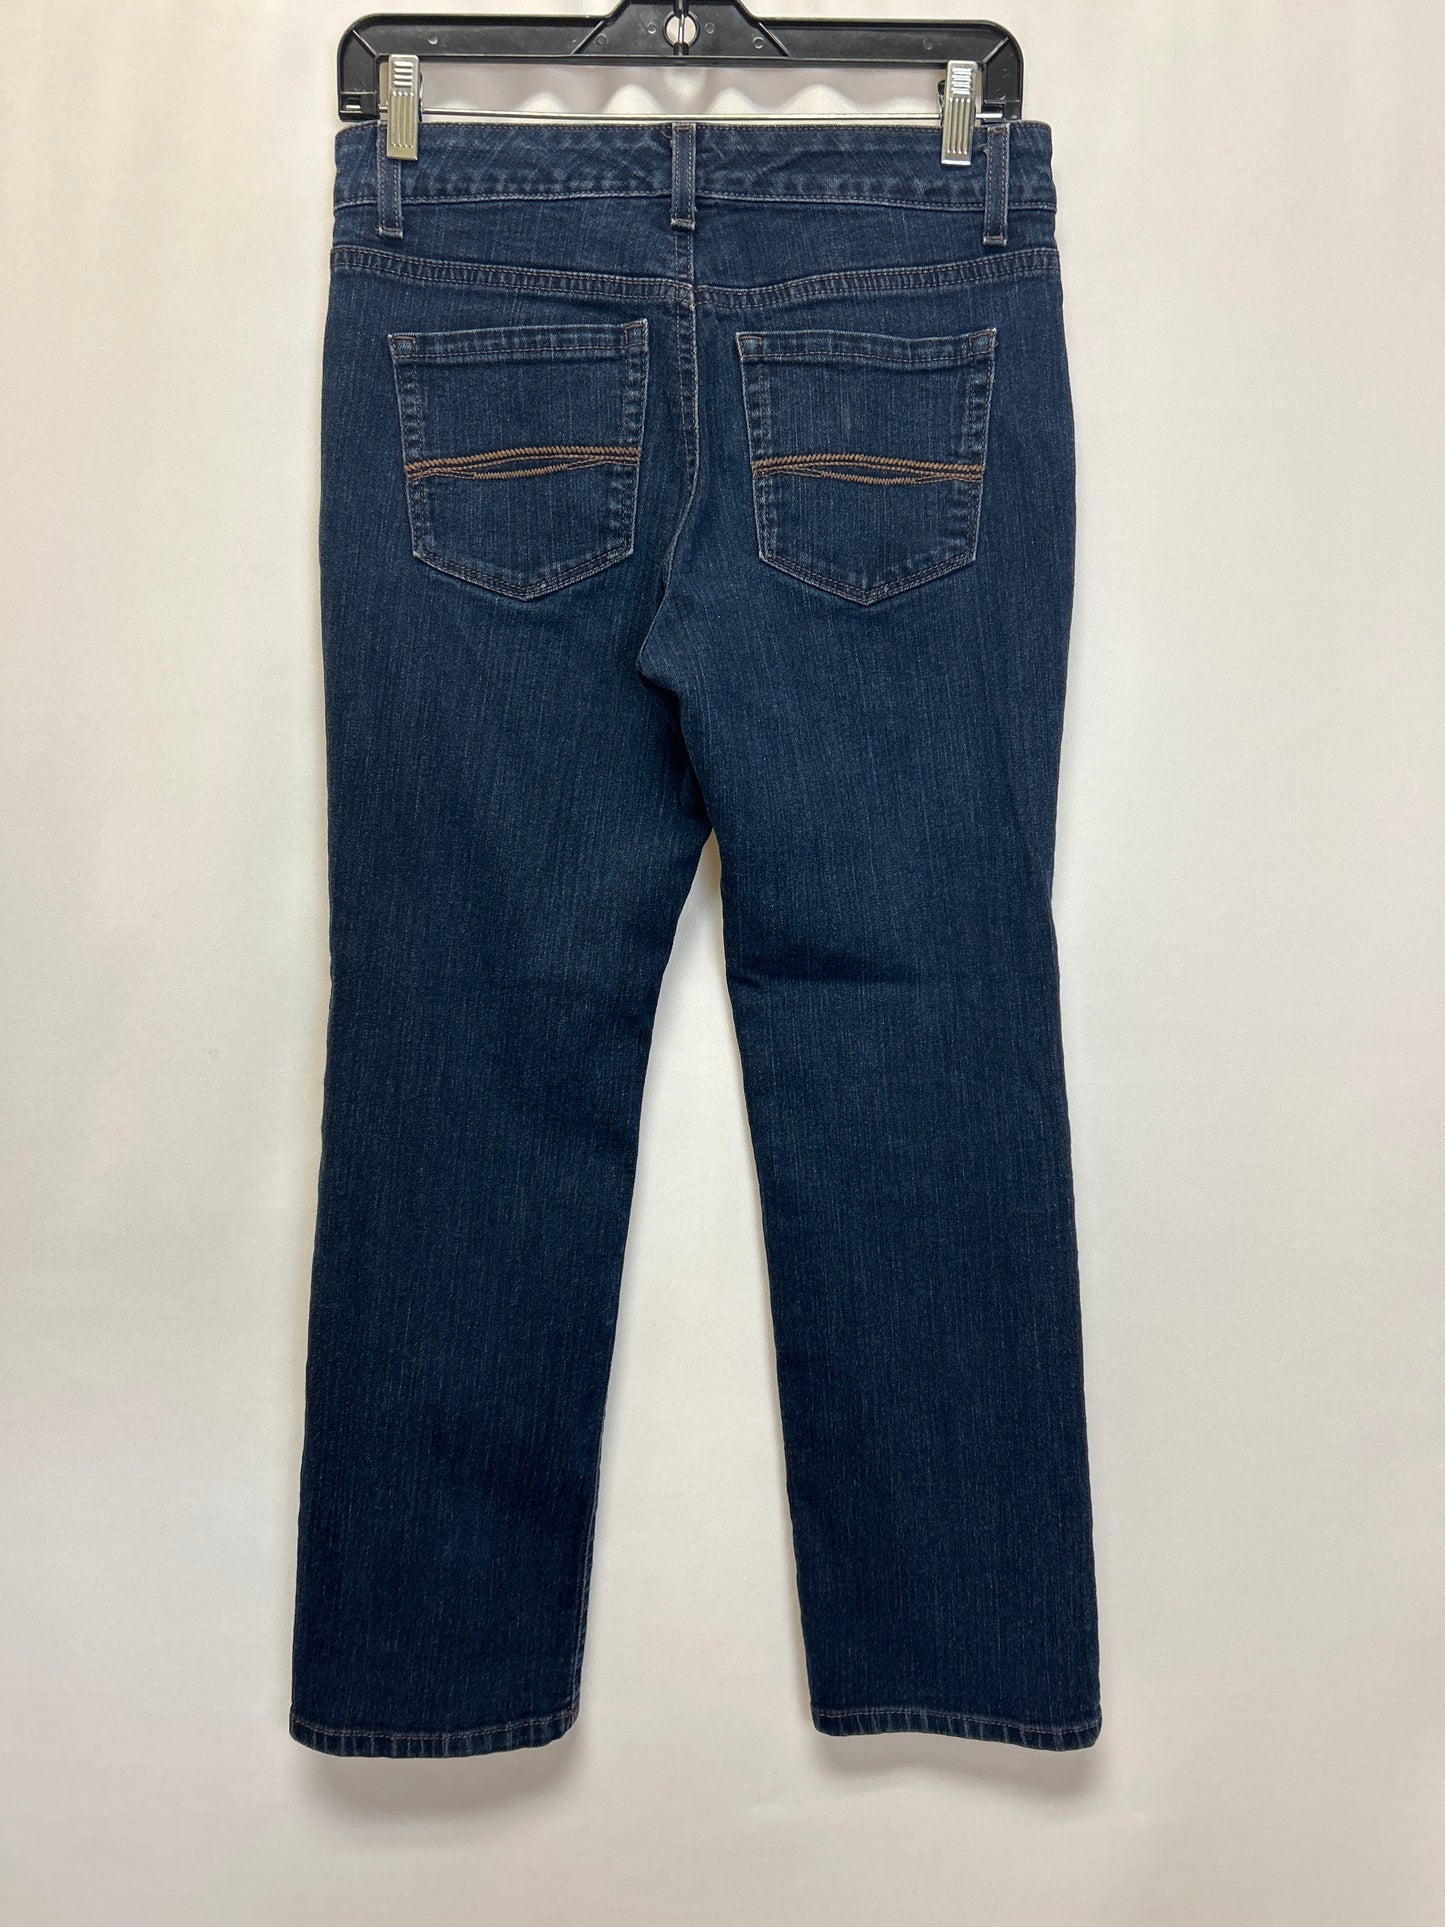 Jeans Straight By Bandolino  Size: 4petite